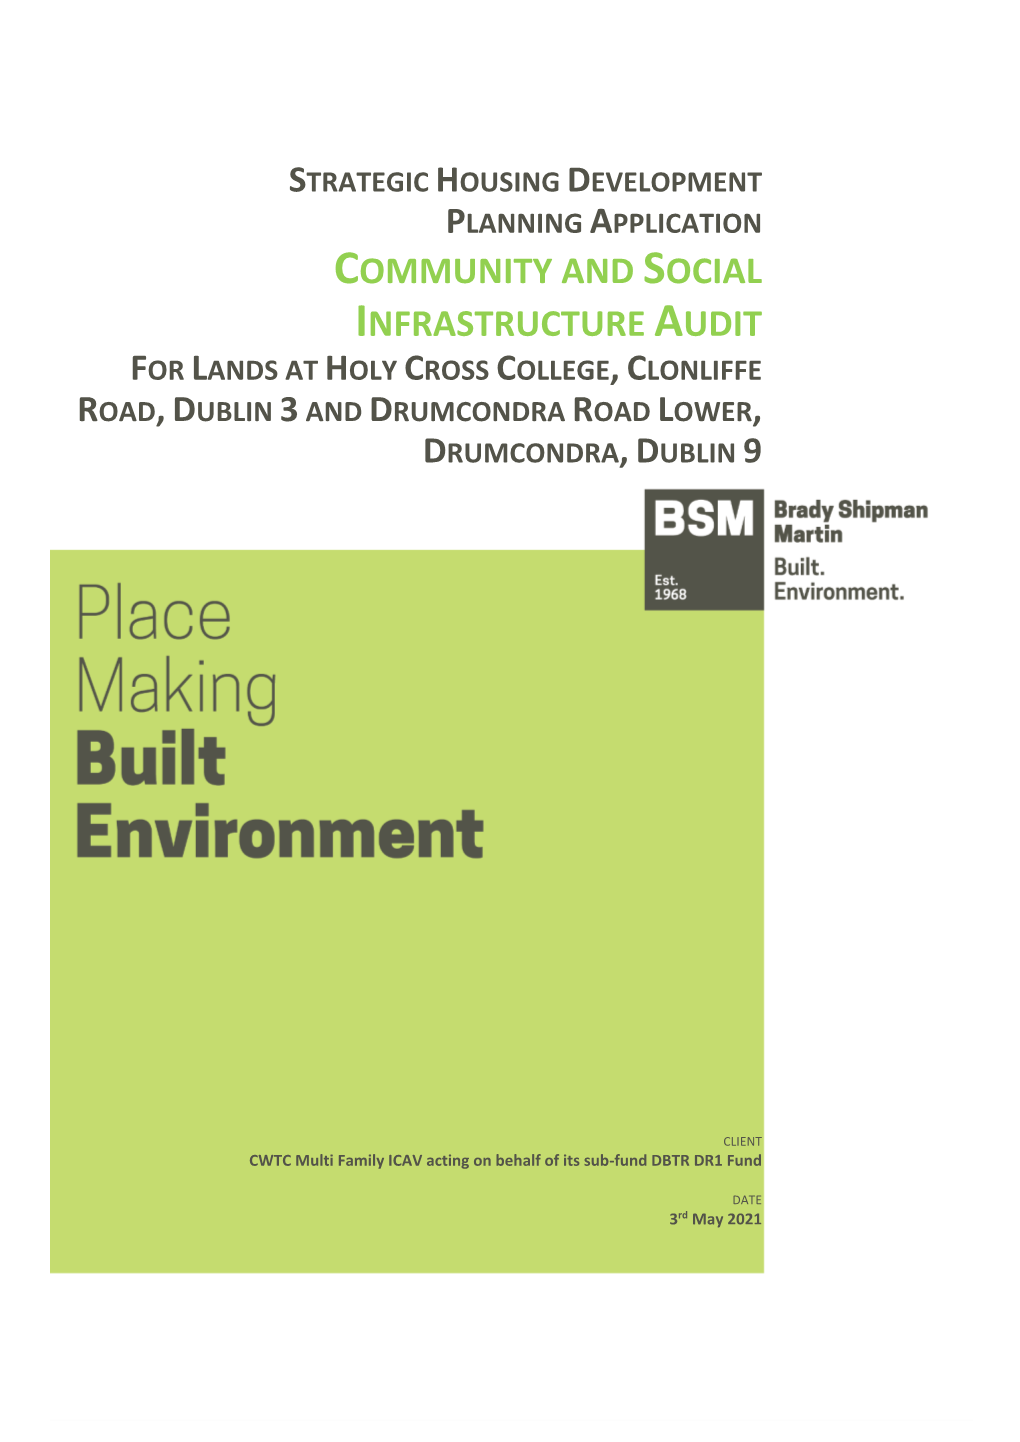 Community and Social Infrastructure Audit for Lands at Holy Cross College, Clonliffe Road, Dublin 3 and Drumcondra Road Lower, Drumcondra, Dublin 9